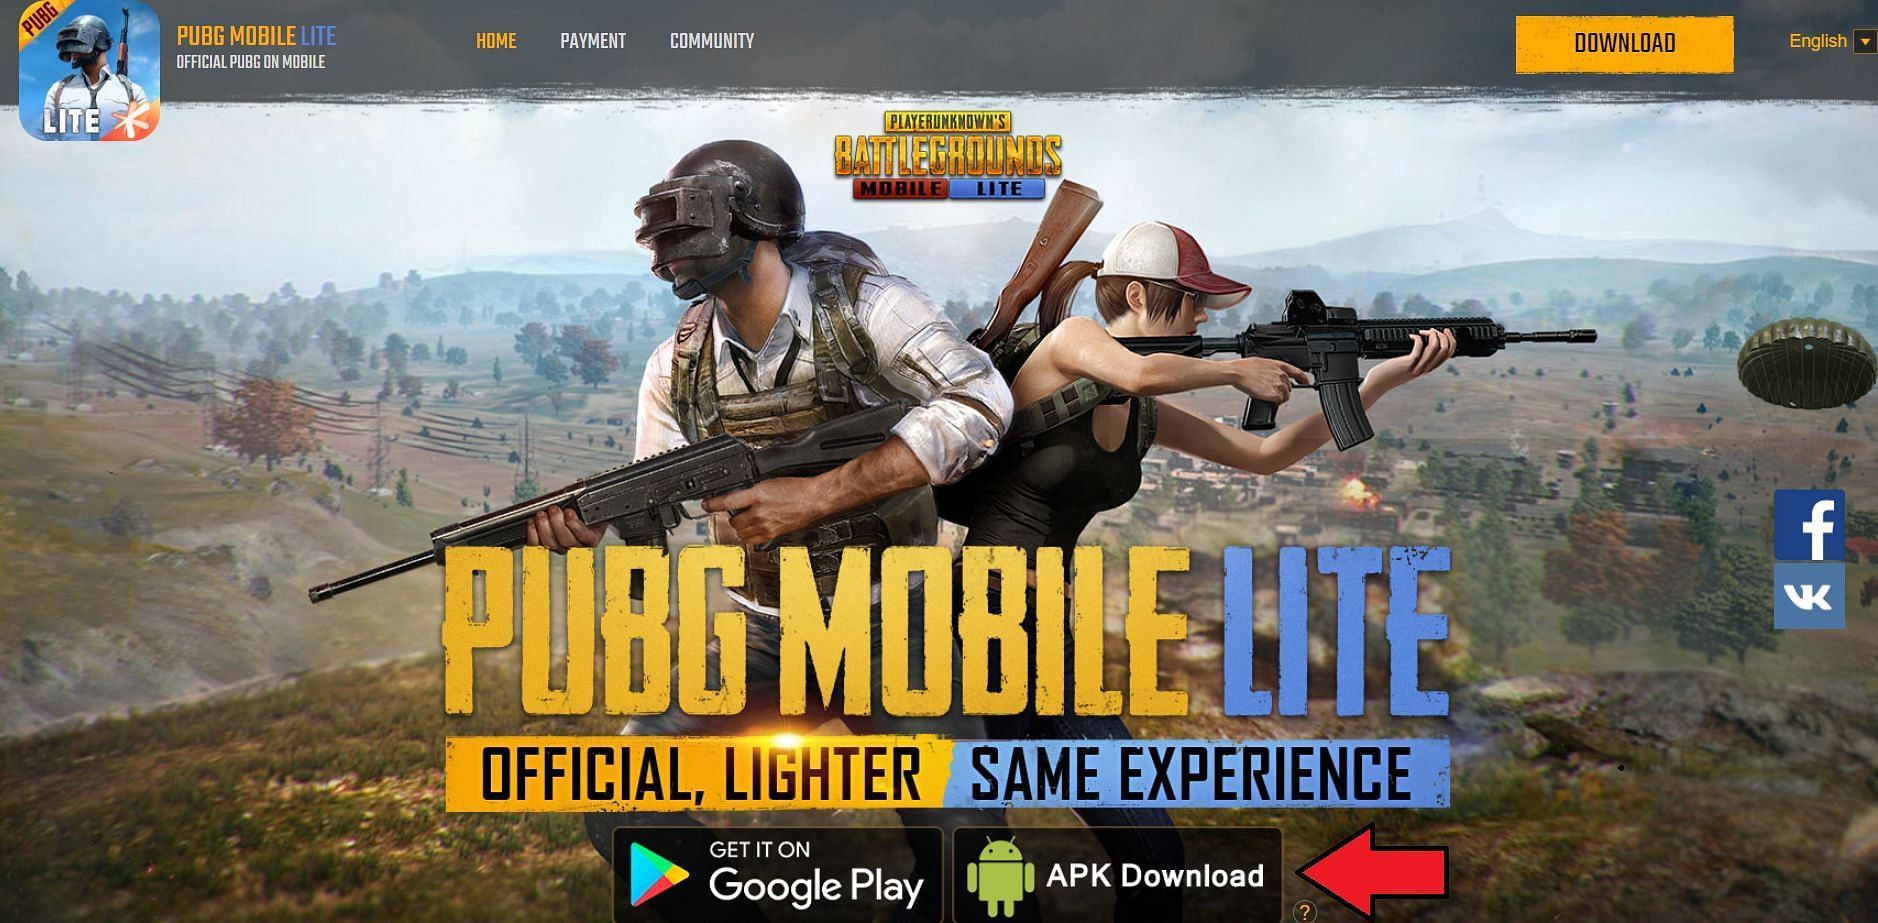 This is the button players should press to start the download (Image via PUBG Mobile Lite)